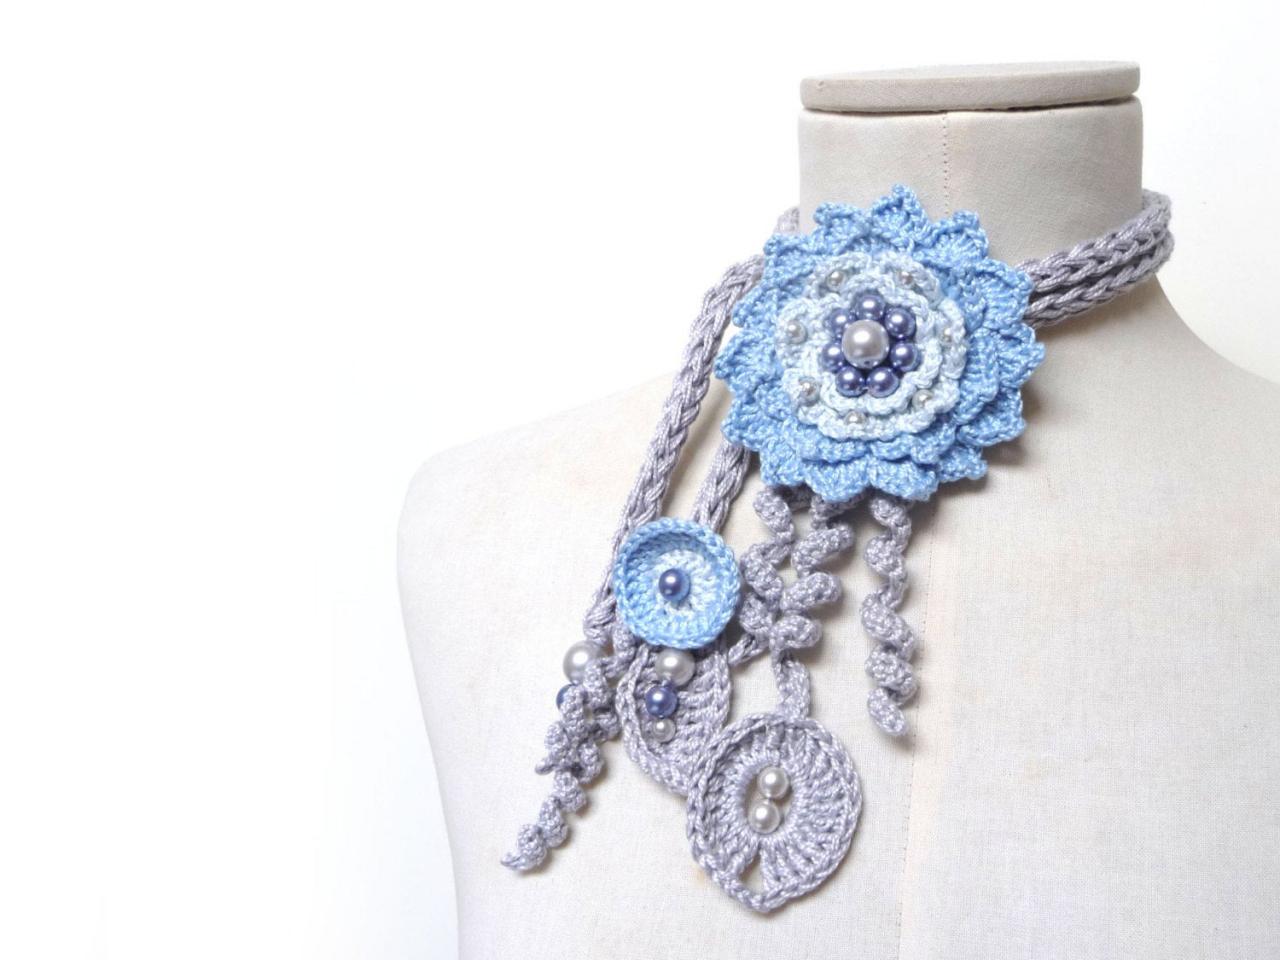 Crochet Cotton Lariat Necklace - Light Grey Leaves And Baby Blue Flower With Glass Pearls - Little Peony